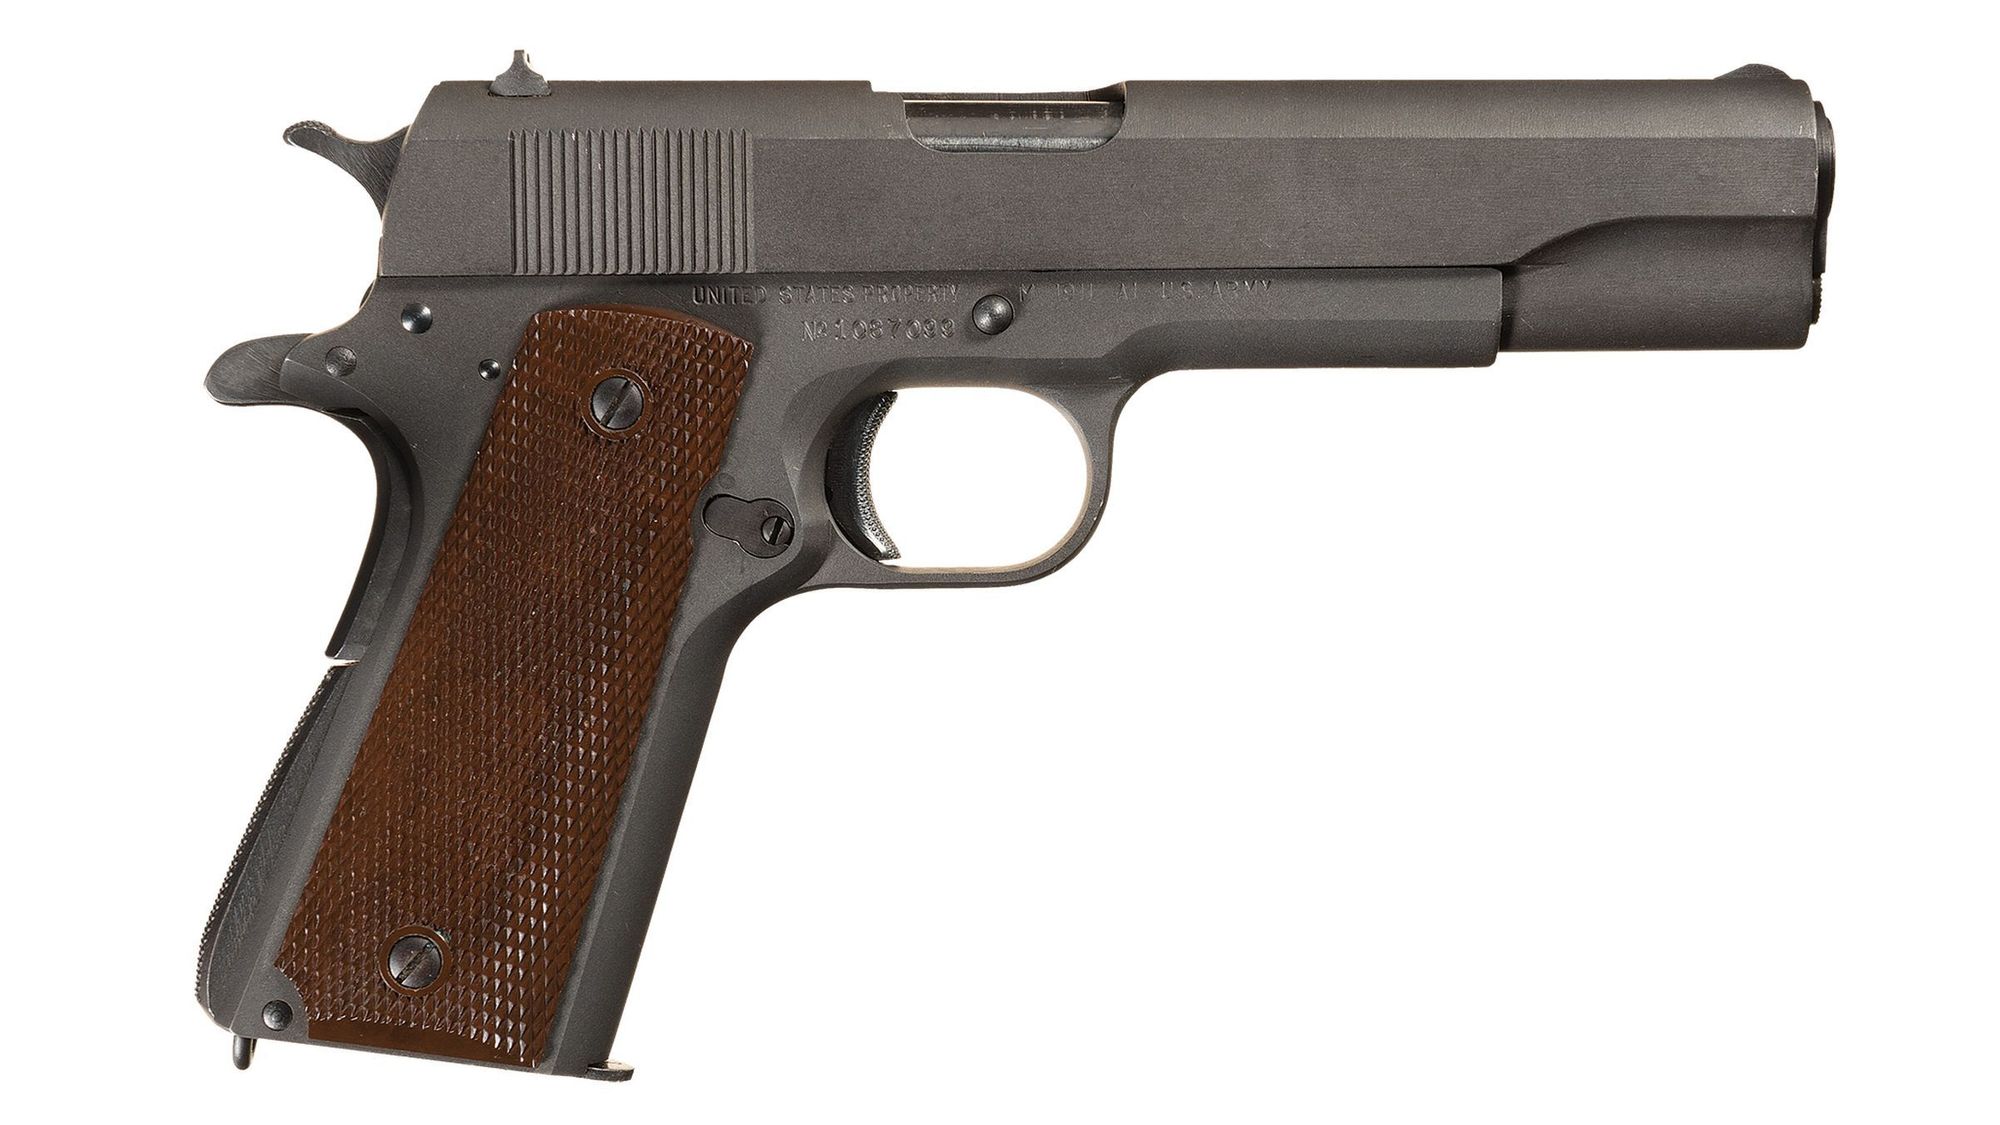 Union Swith & Signal M1911A1 